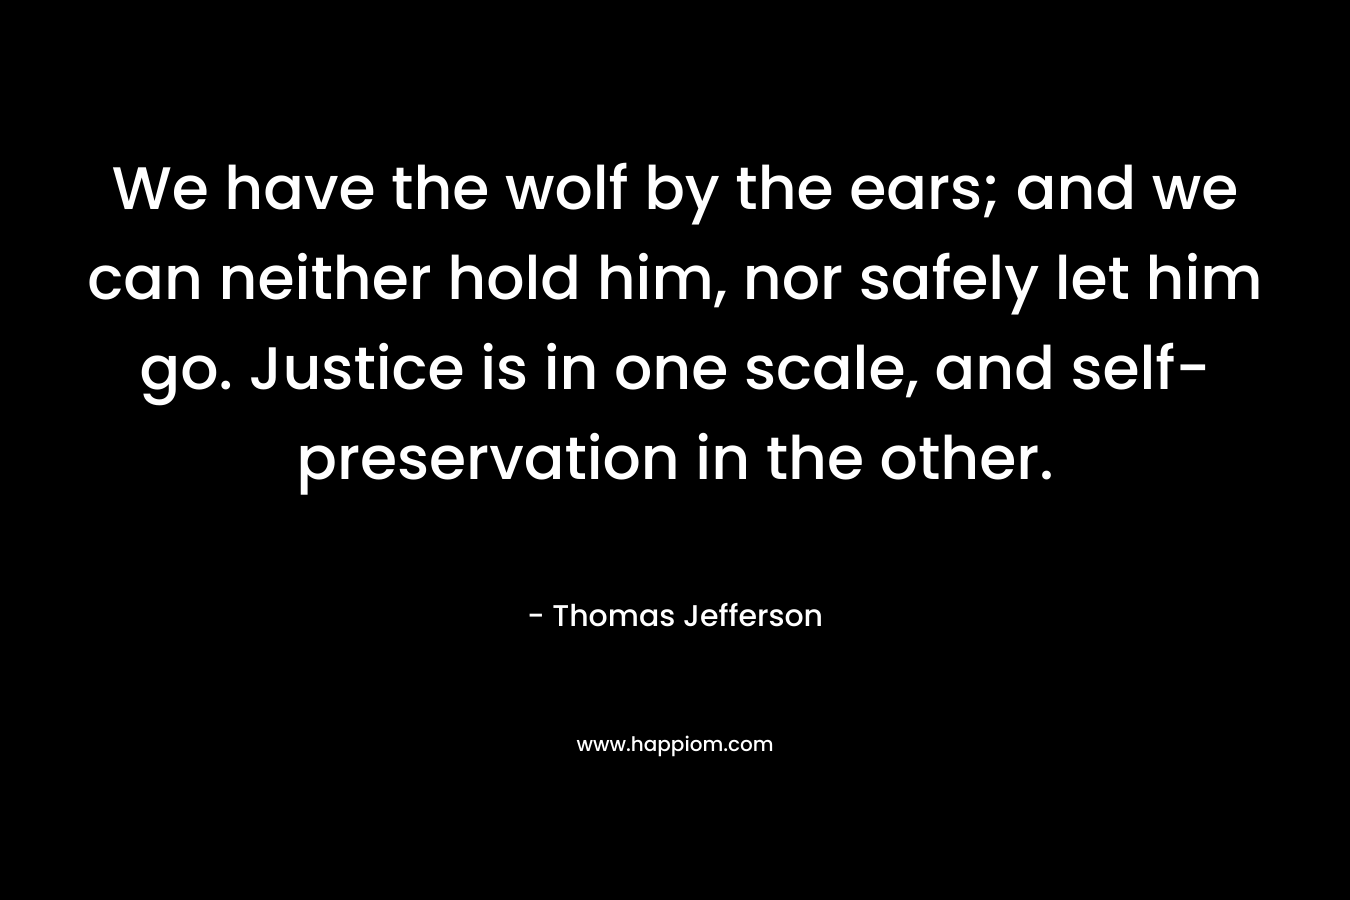 We have the wolf by the ears; and we can neither hold him, nor safely let him go. Justice is in one scale, and self-preservation in the other. – Thomas Jefferson